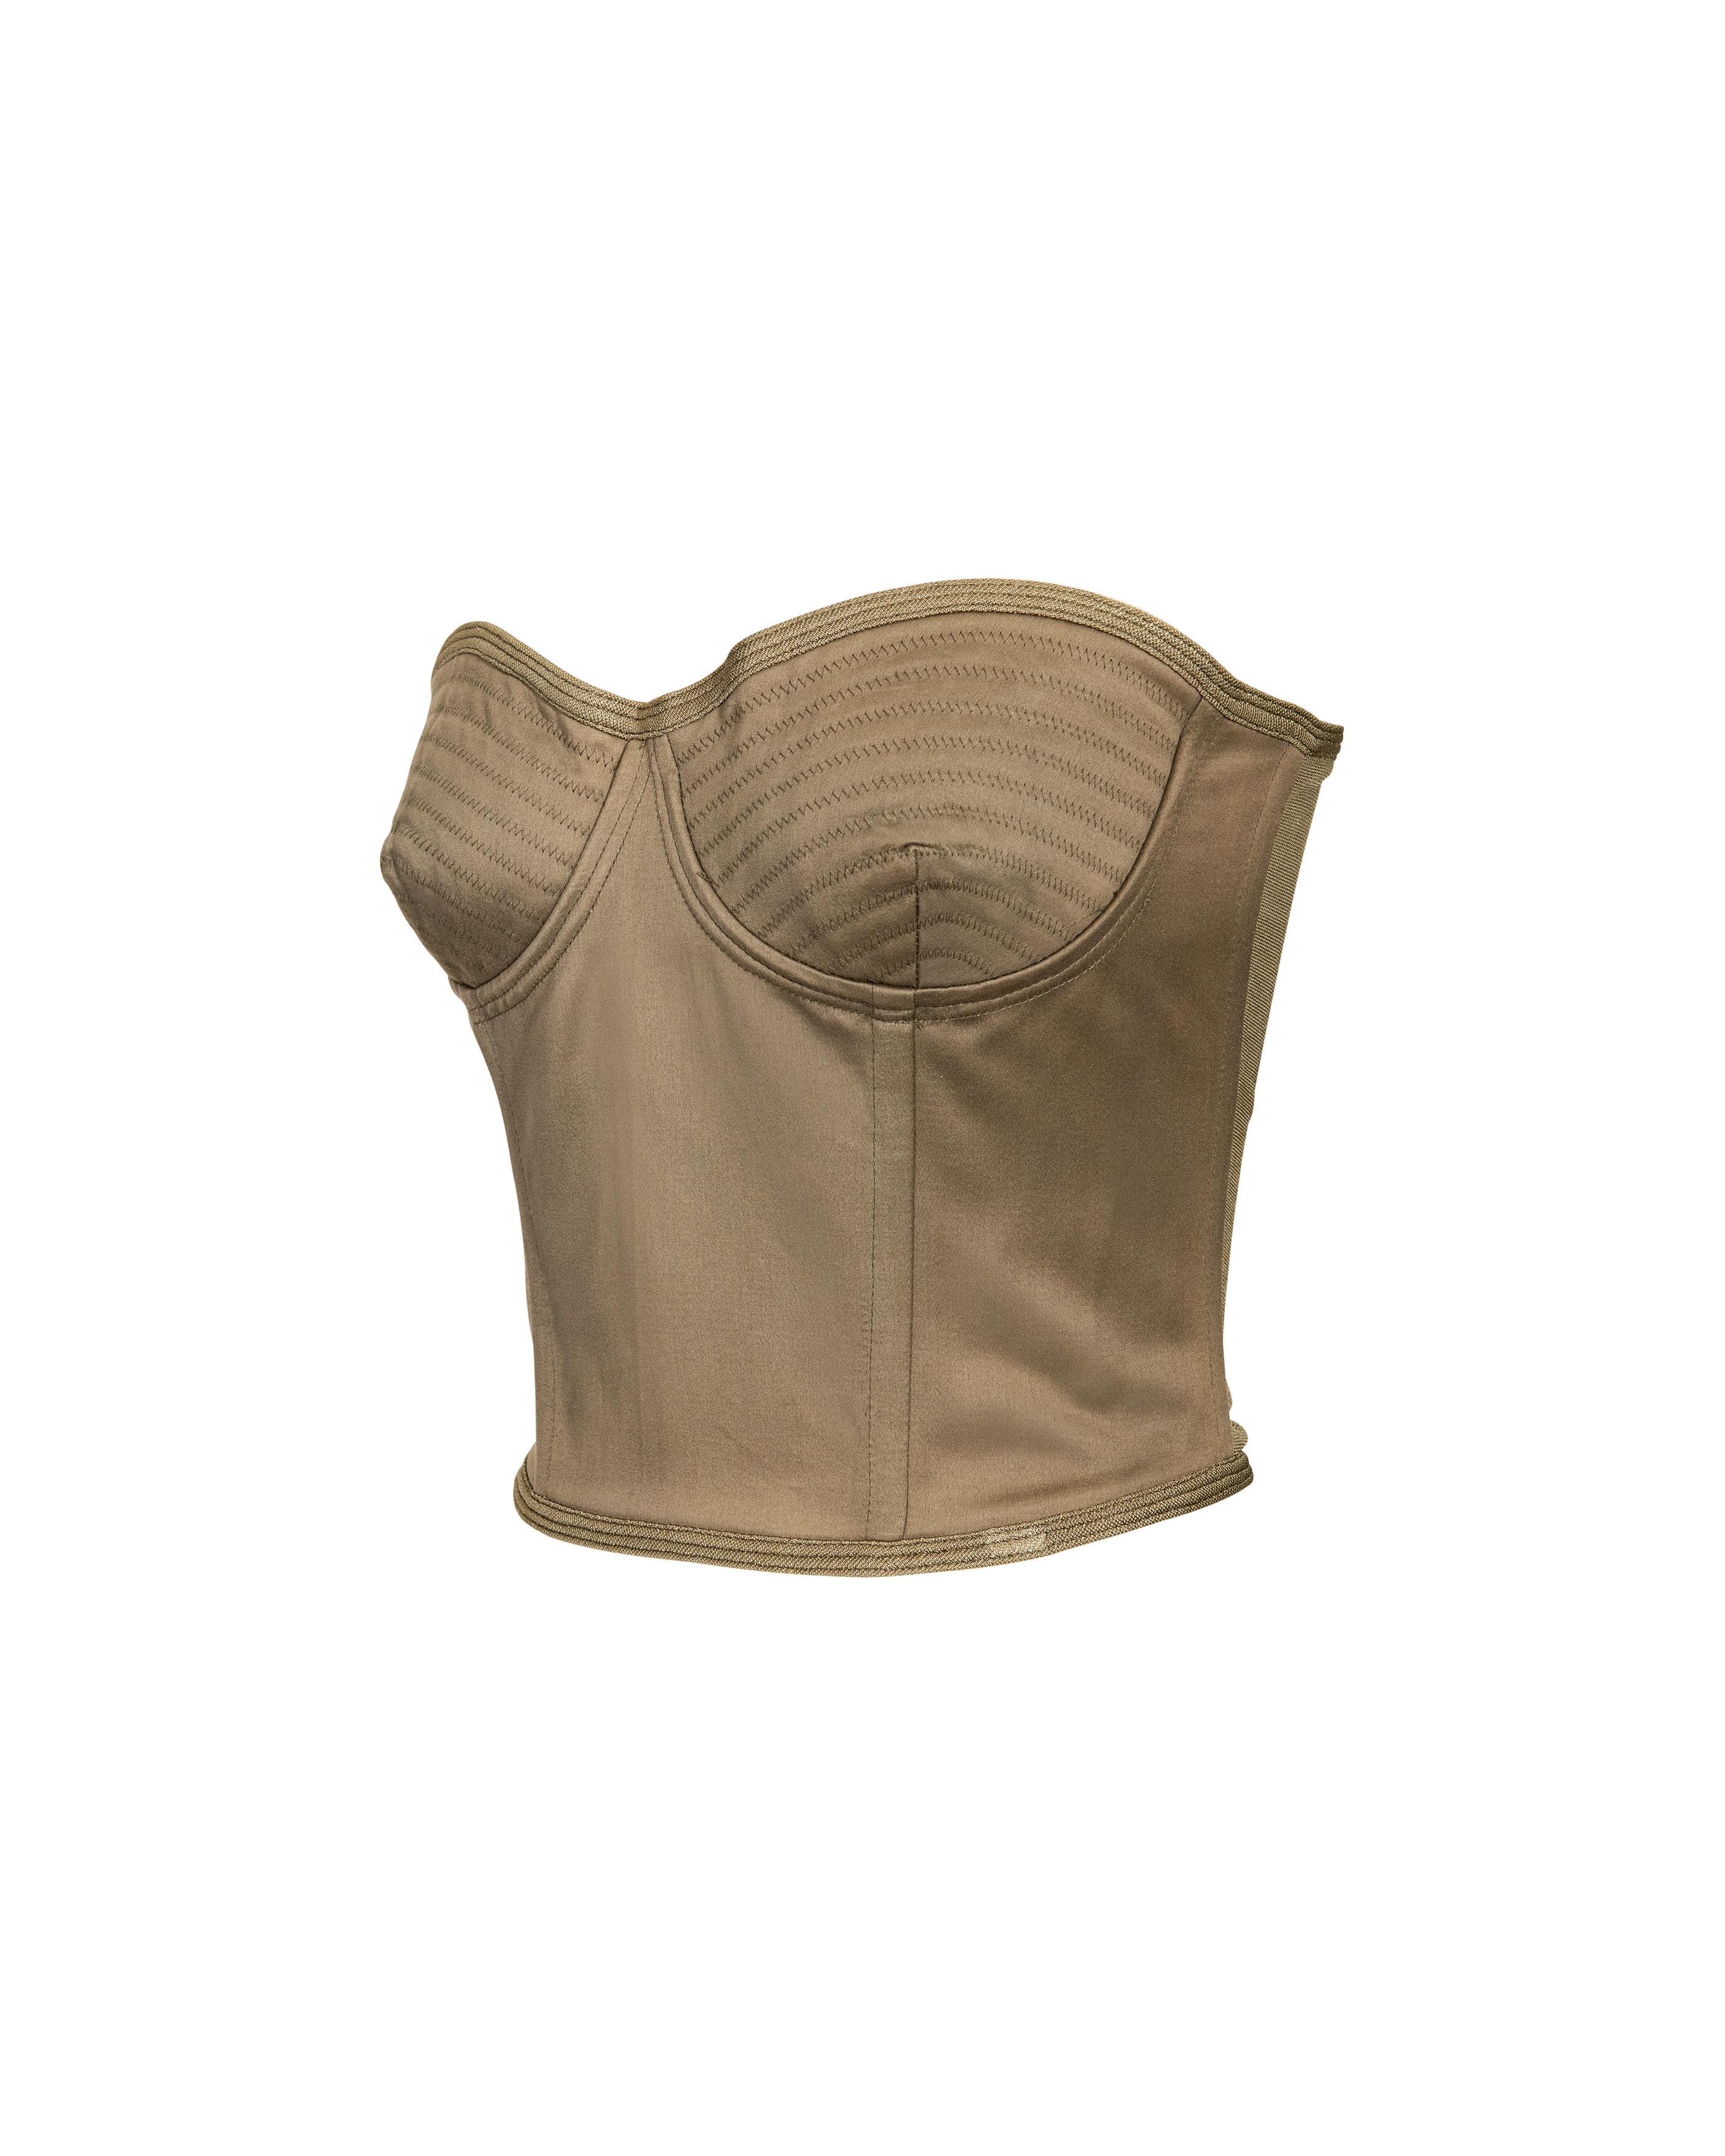 1990's Gianni Versace olive green strapless corset. Silk corset with elastic back paneling and built-in boning. Bra cups are boned for additional structure, with curved stitching throughout. Concealed center back zip closure. In very good vintage